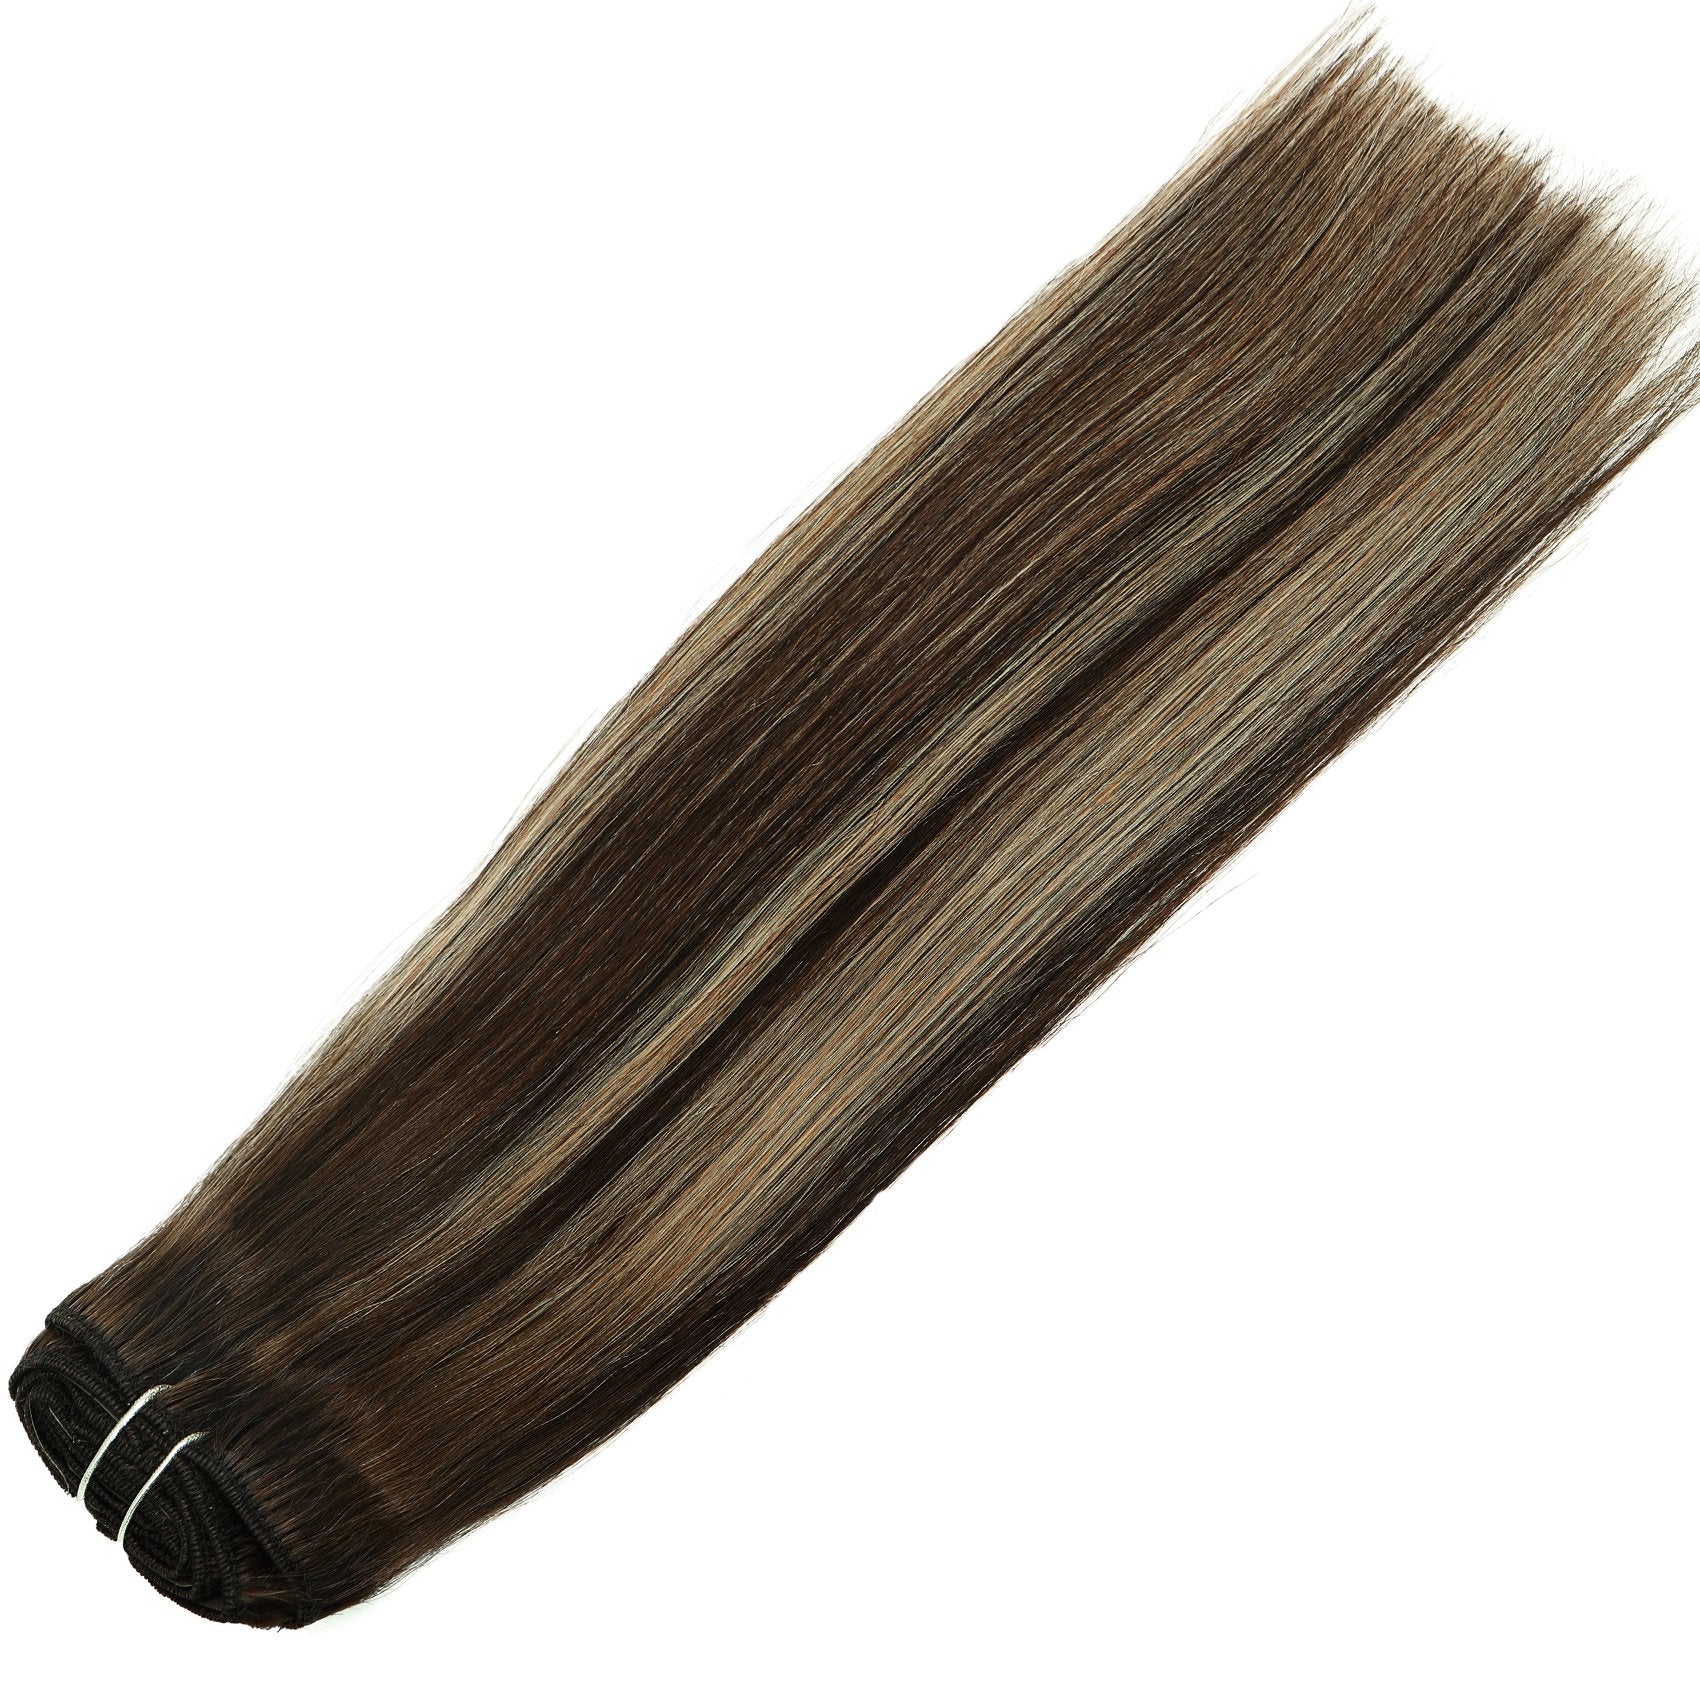 Chocolate Brown Root with Honey Blonde Highlights Clip In Hair Extensions 120g Set